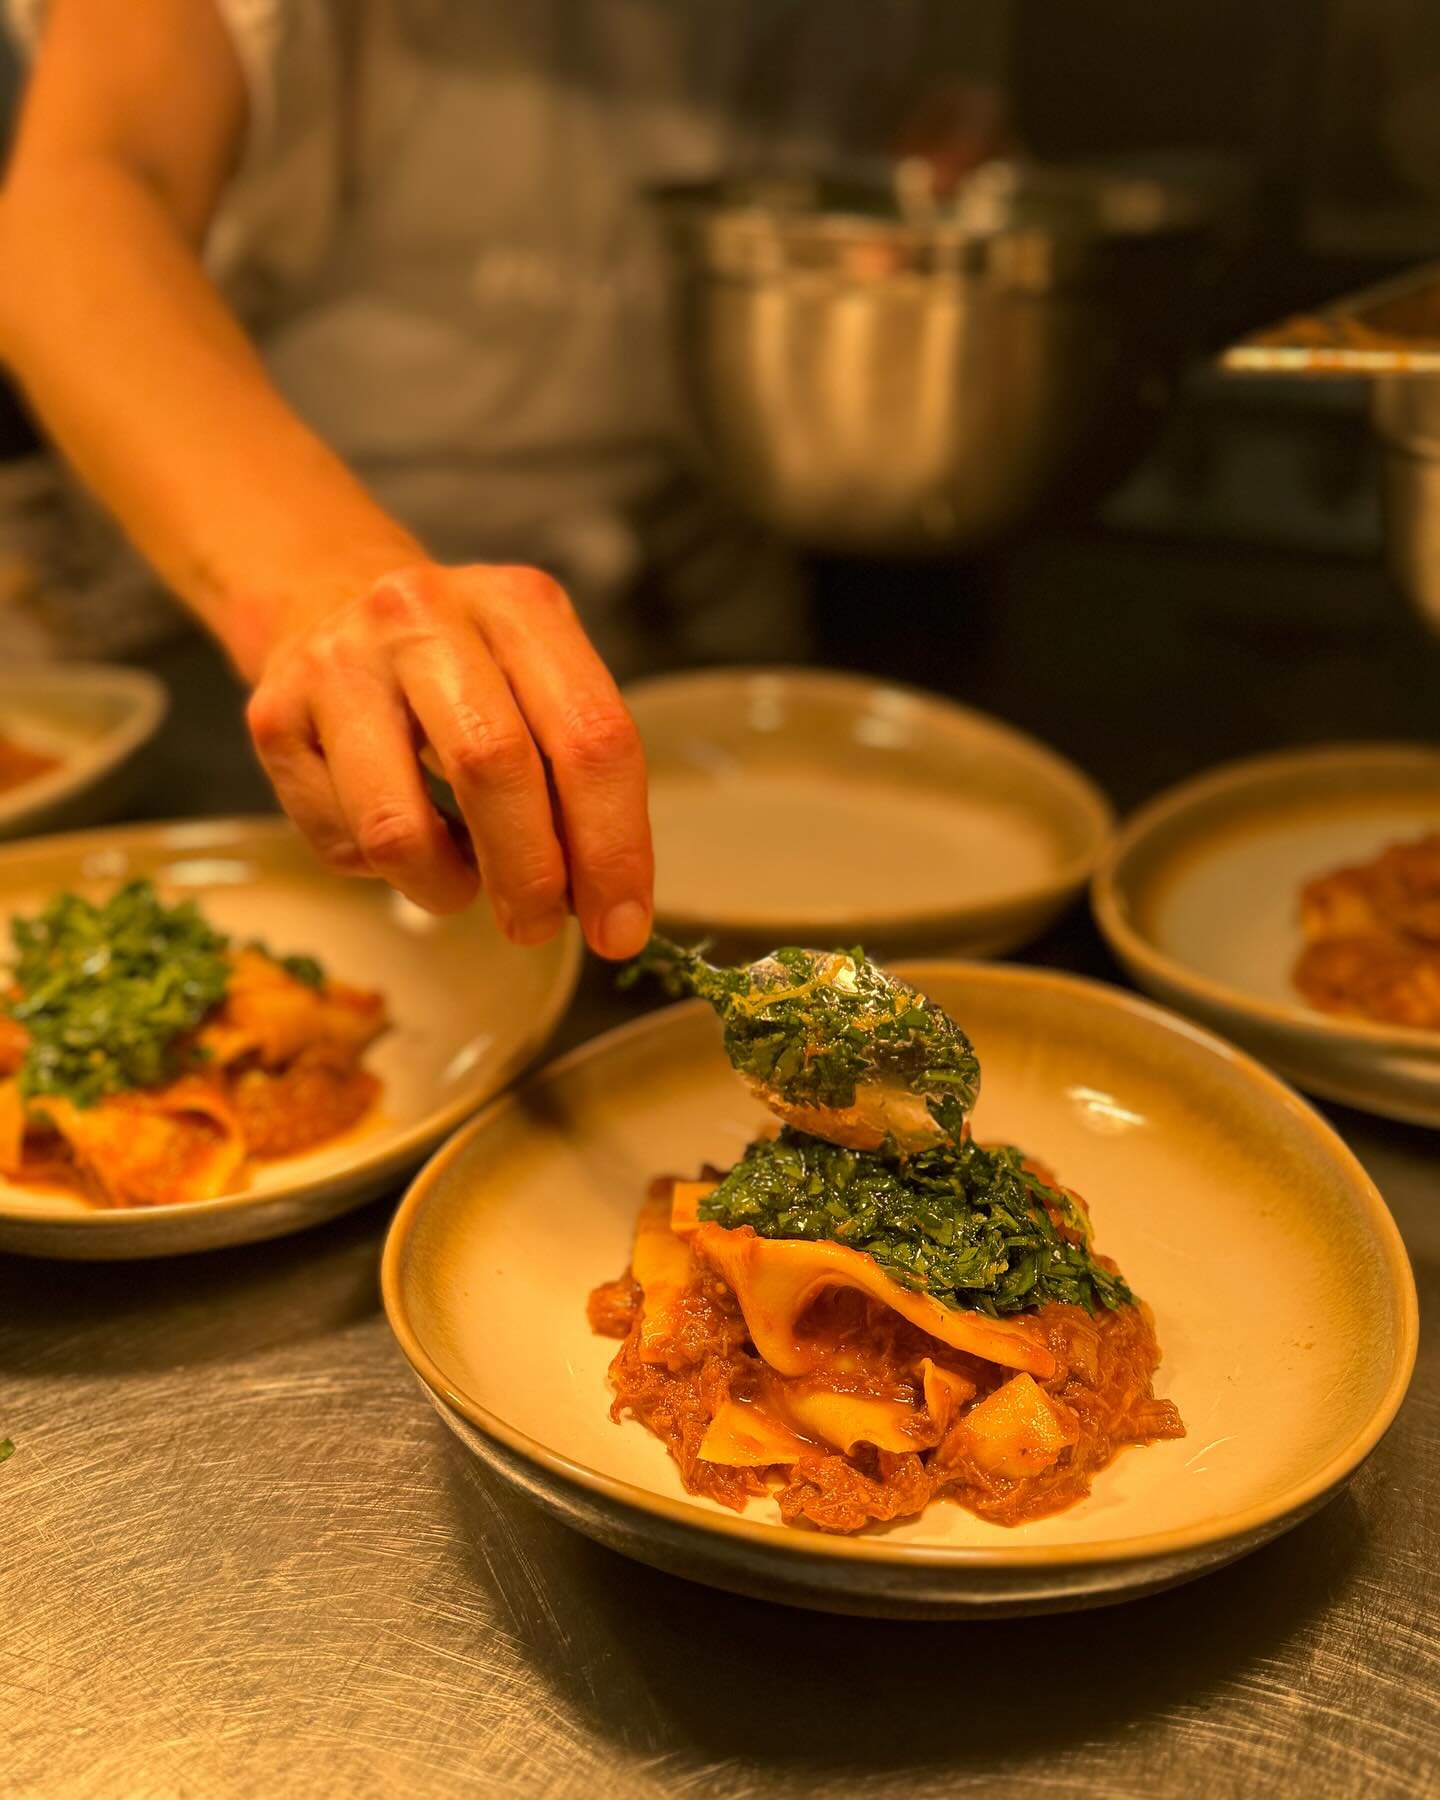 12 hour beef shin ragu, homemade stracci (&ldquo;rags&rdquo;) and gremolata on the pass last night @thewhitehorserogate 🍋 What a wonderful supper club that was thank you for having us guys #supperclub #chefstable #italianvibes #pastanight @roseharvi